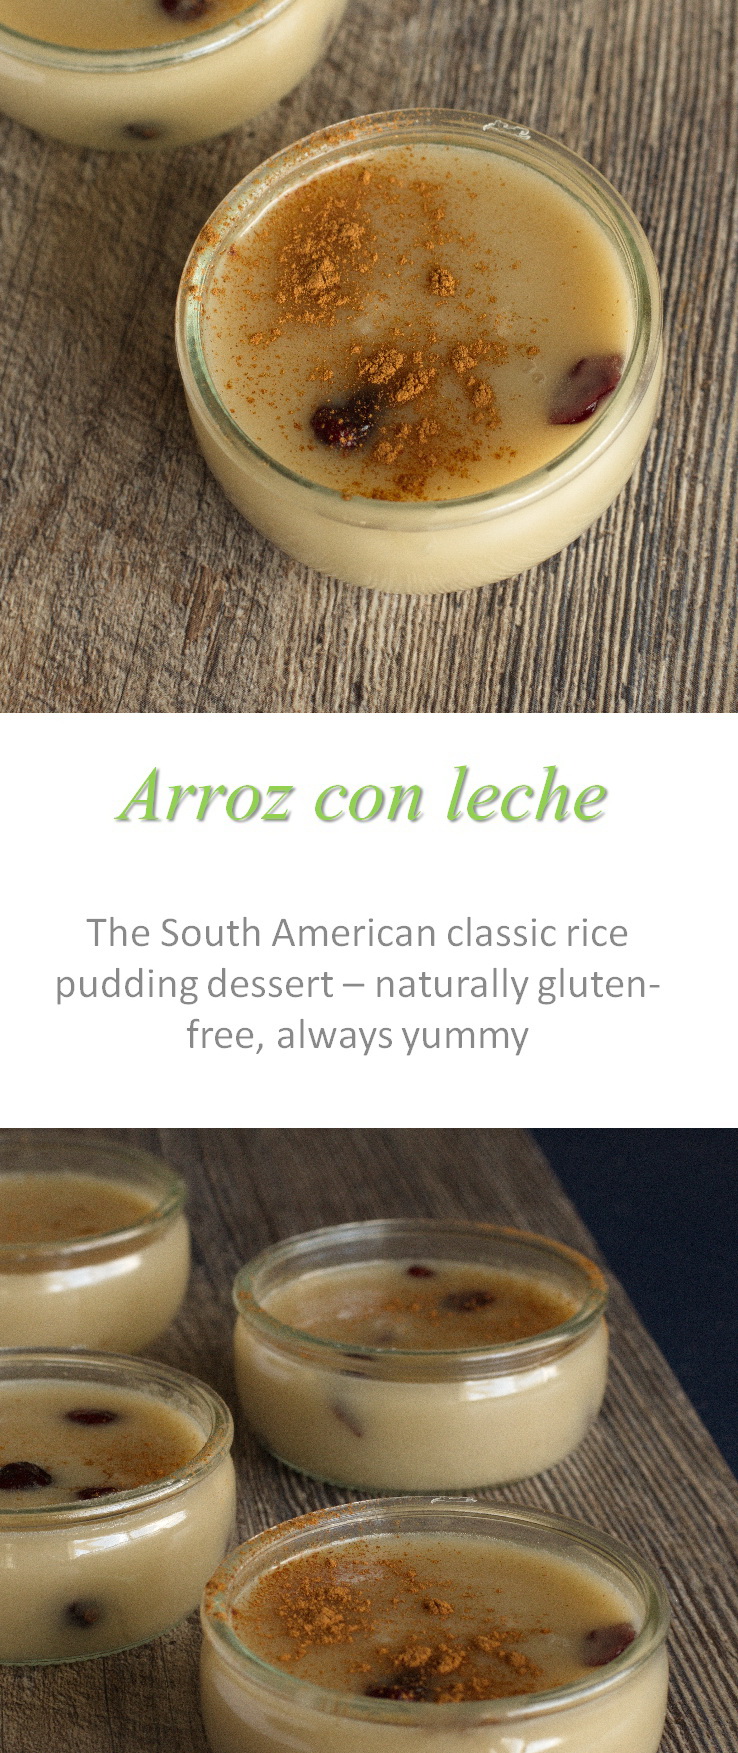 Arroz con leche (or a rice pudding) is the classic South American dessert - naturally gluten-free and full of taste #ricepudding #glutenfree #dairyfree #peruvian #cookathome